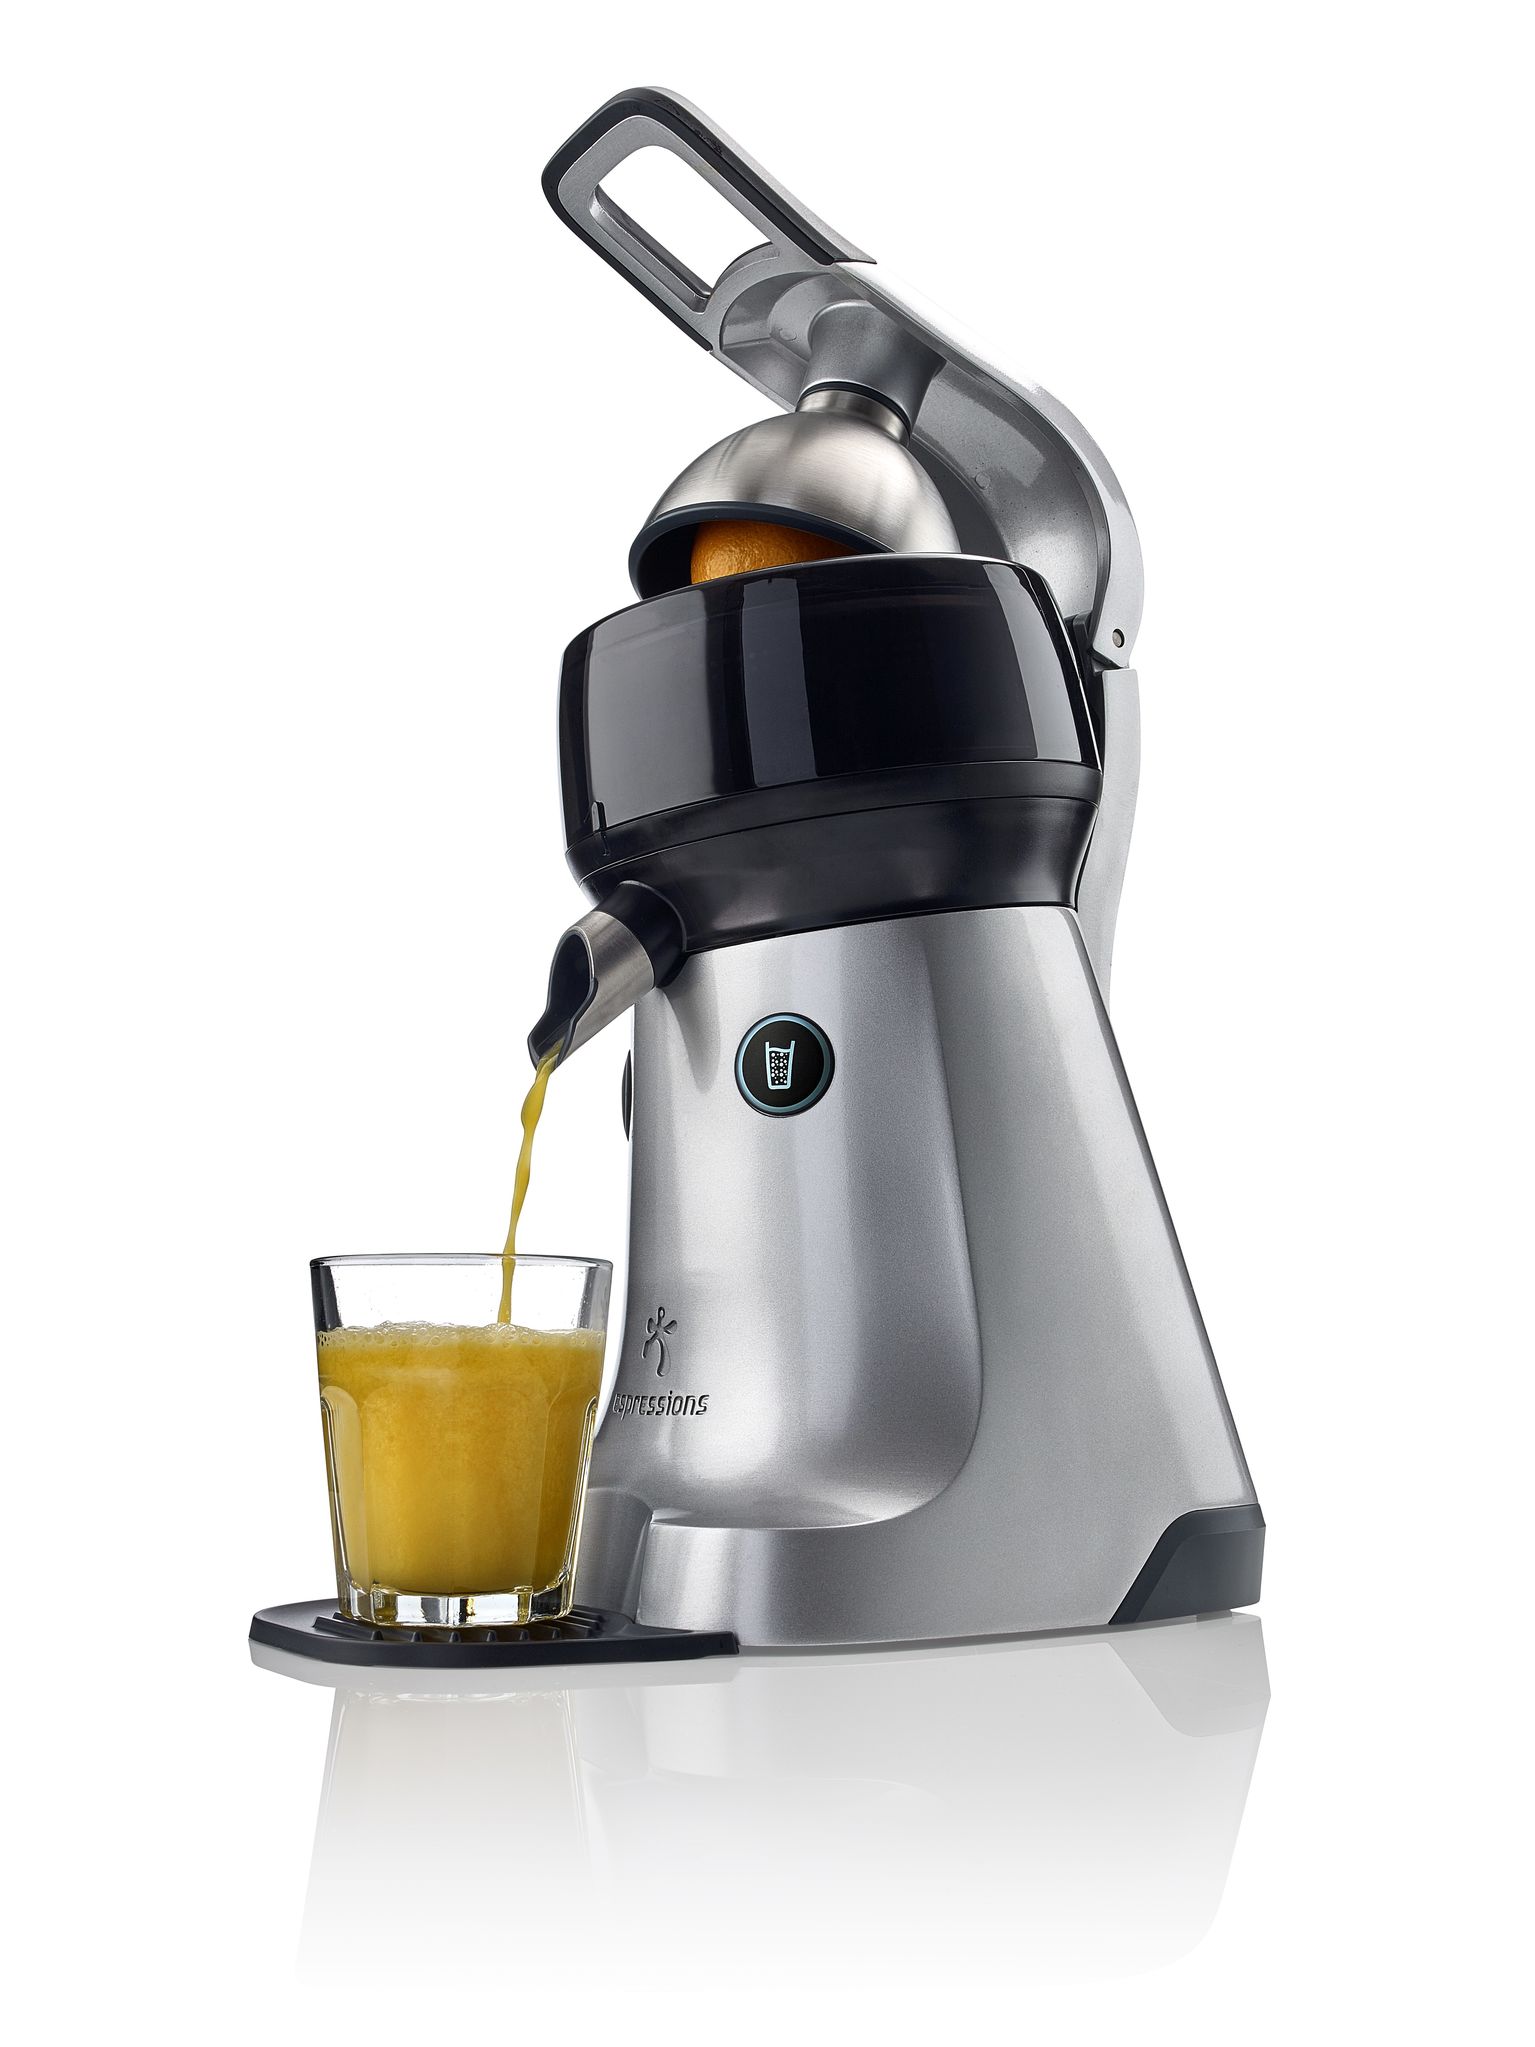 the Juicer